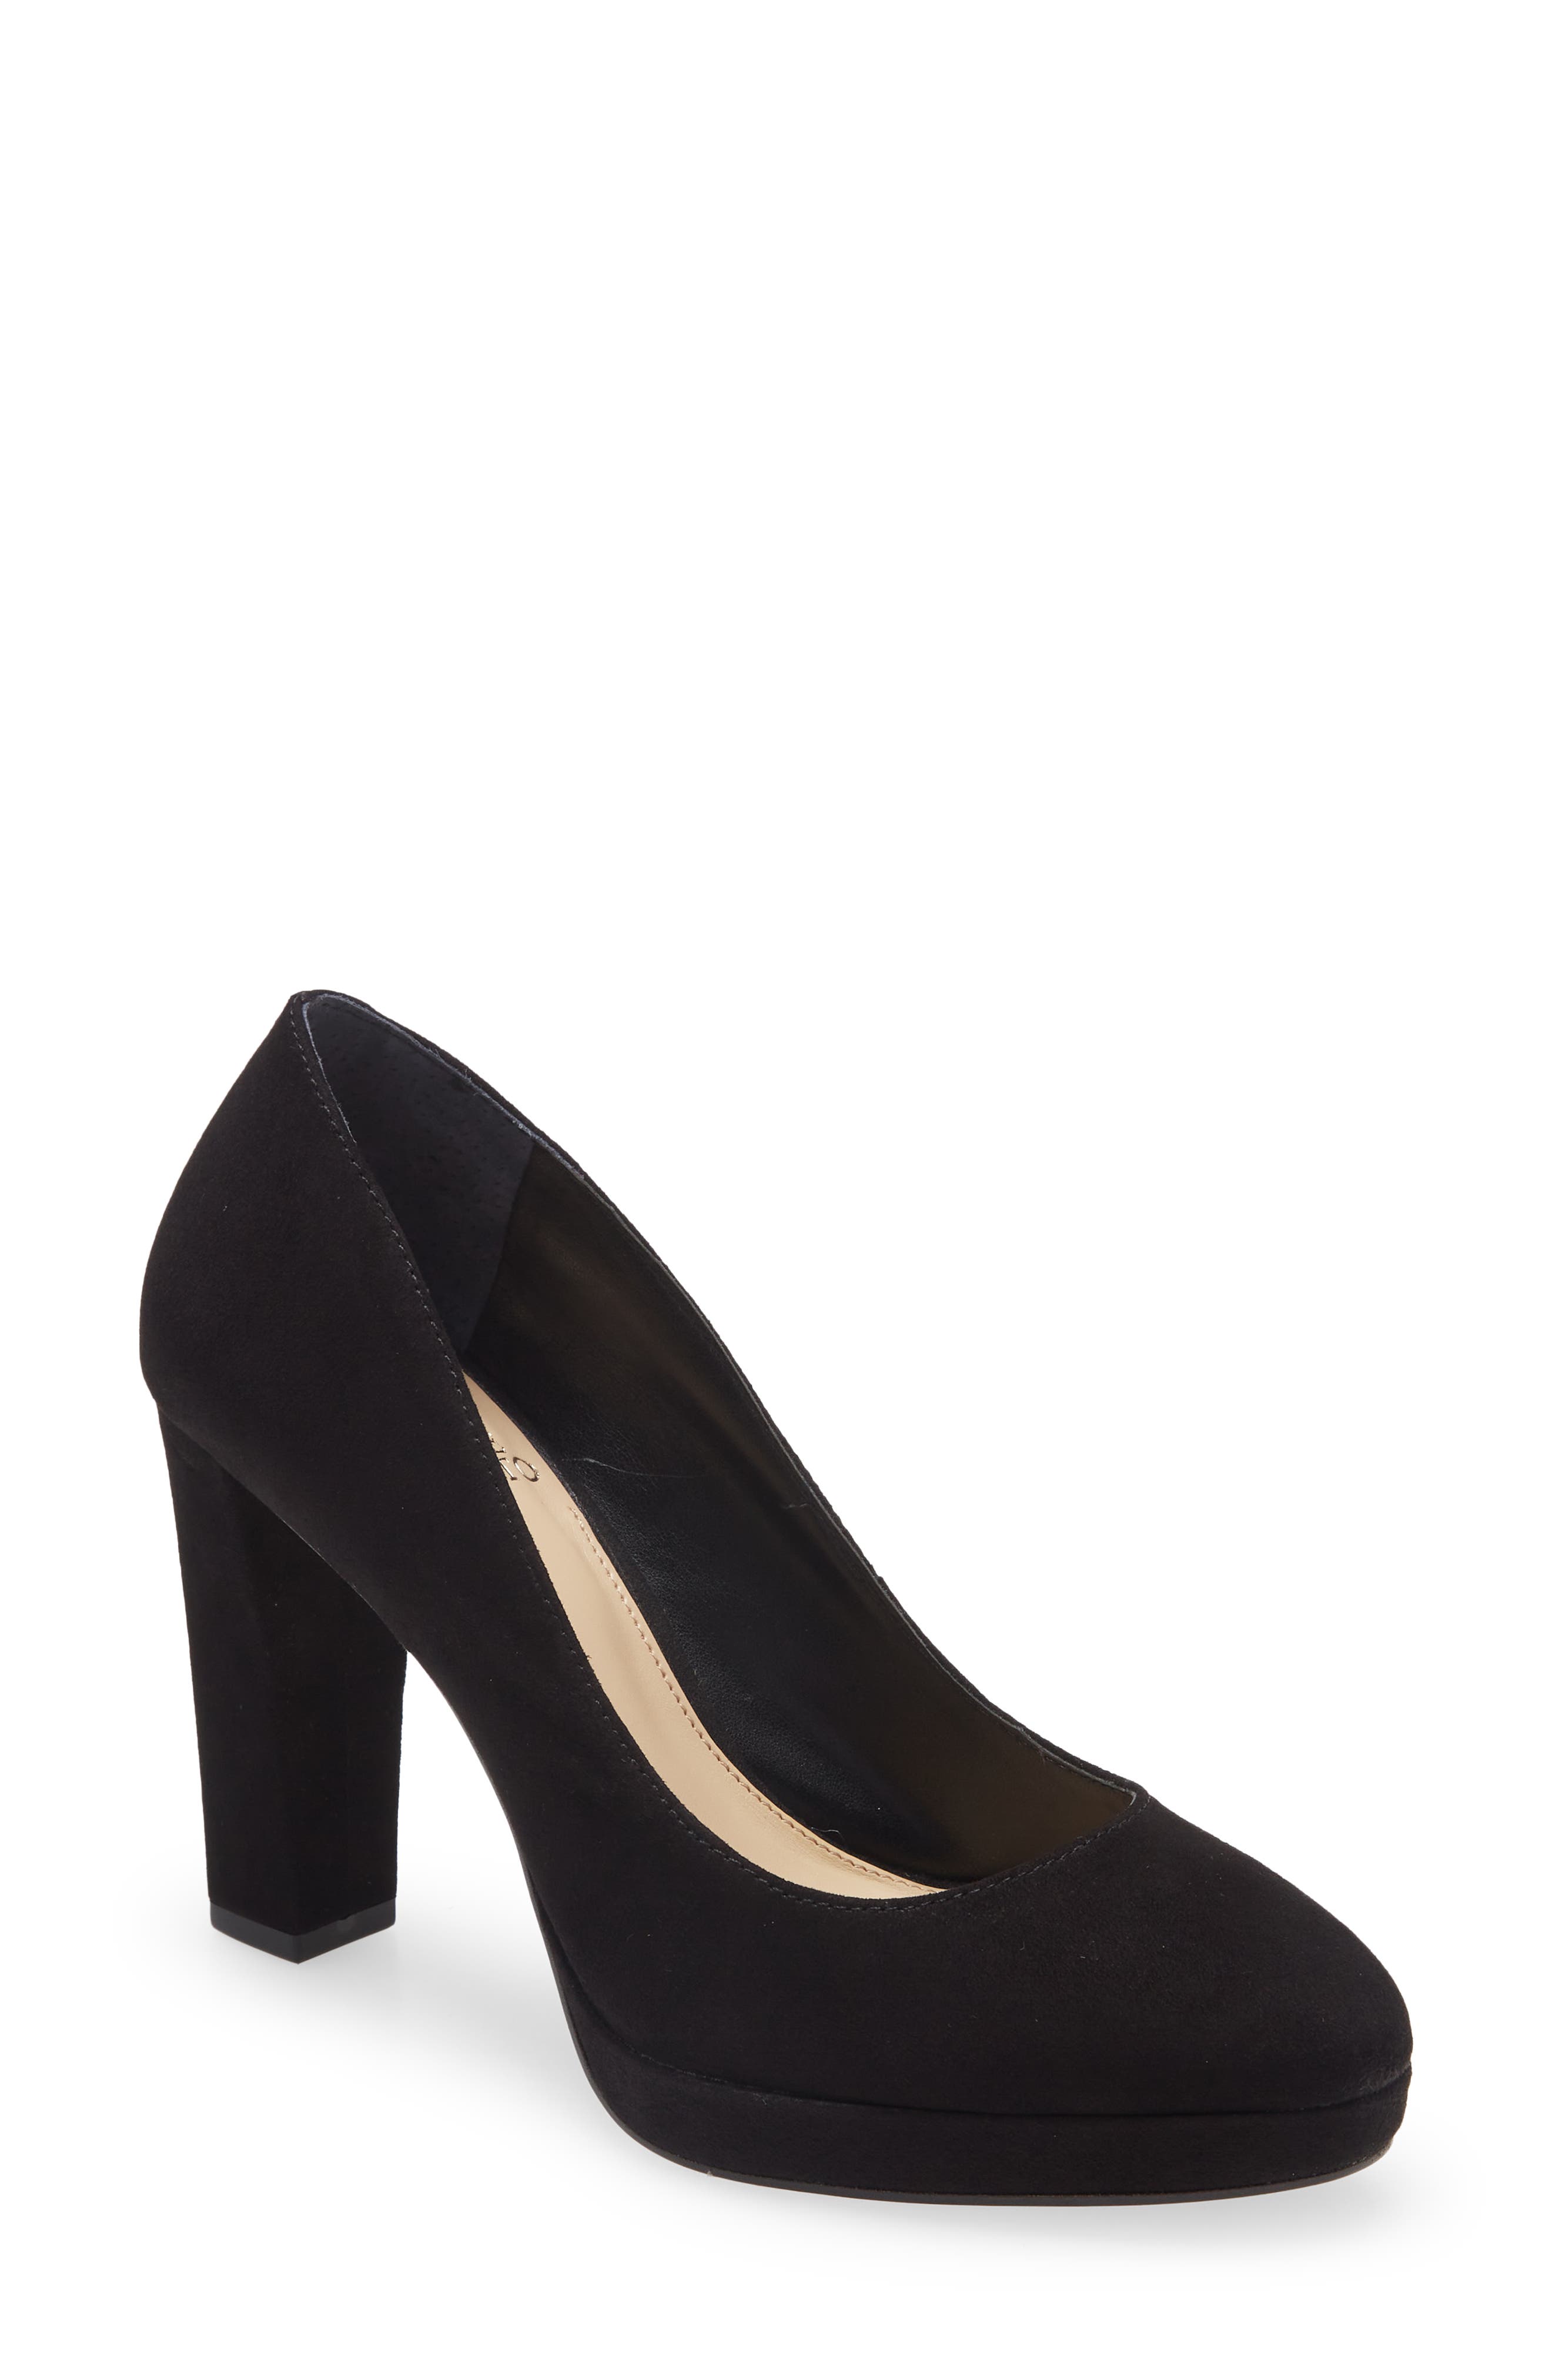 UPC 191707345492 product image for Vince Camuto Halria Pump in Black True Suede at Nordstrom, Size 5.5 | upcitemdb.com